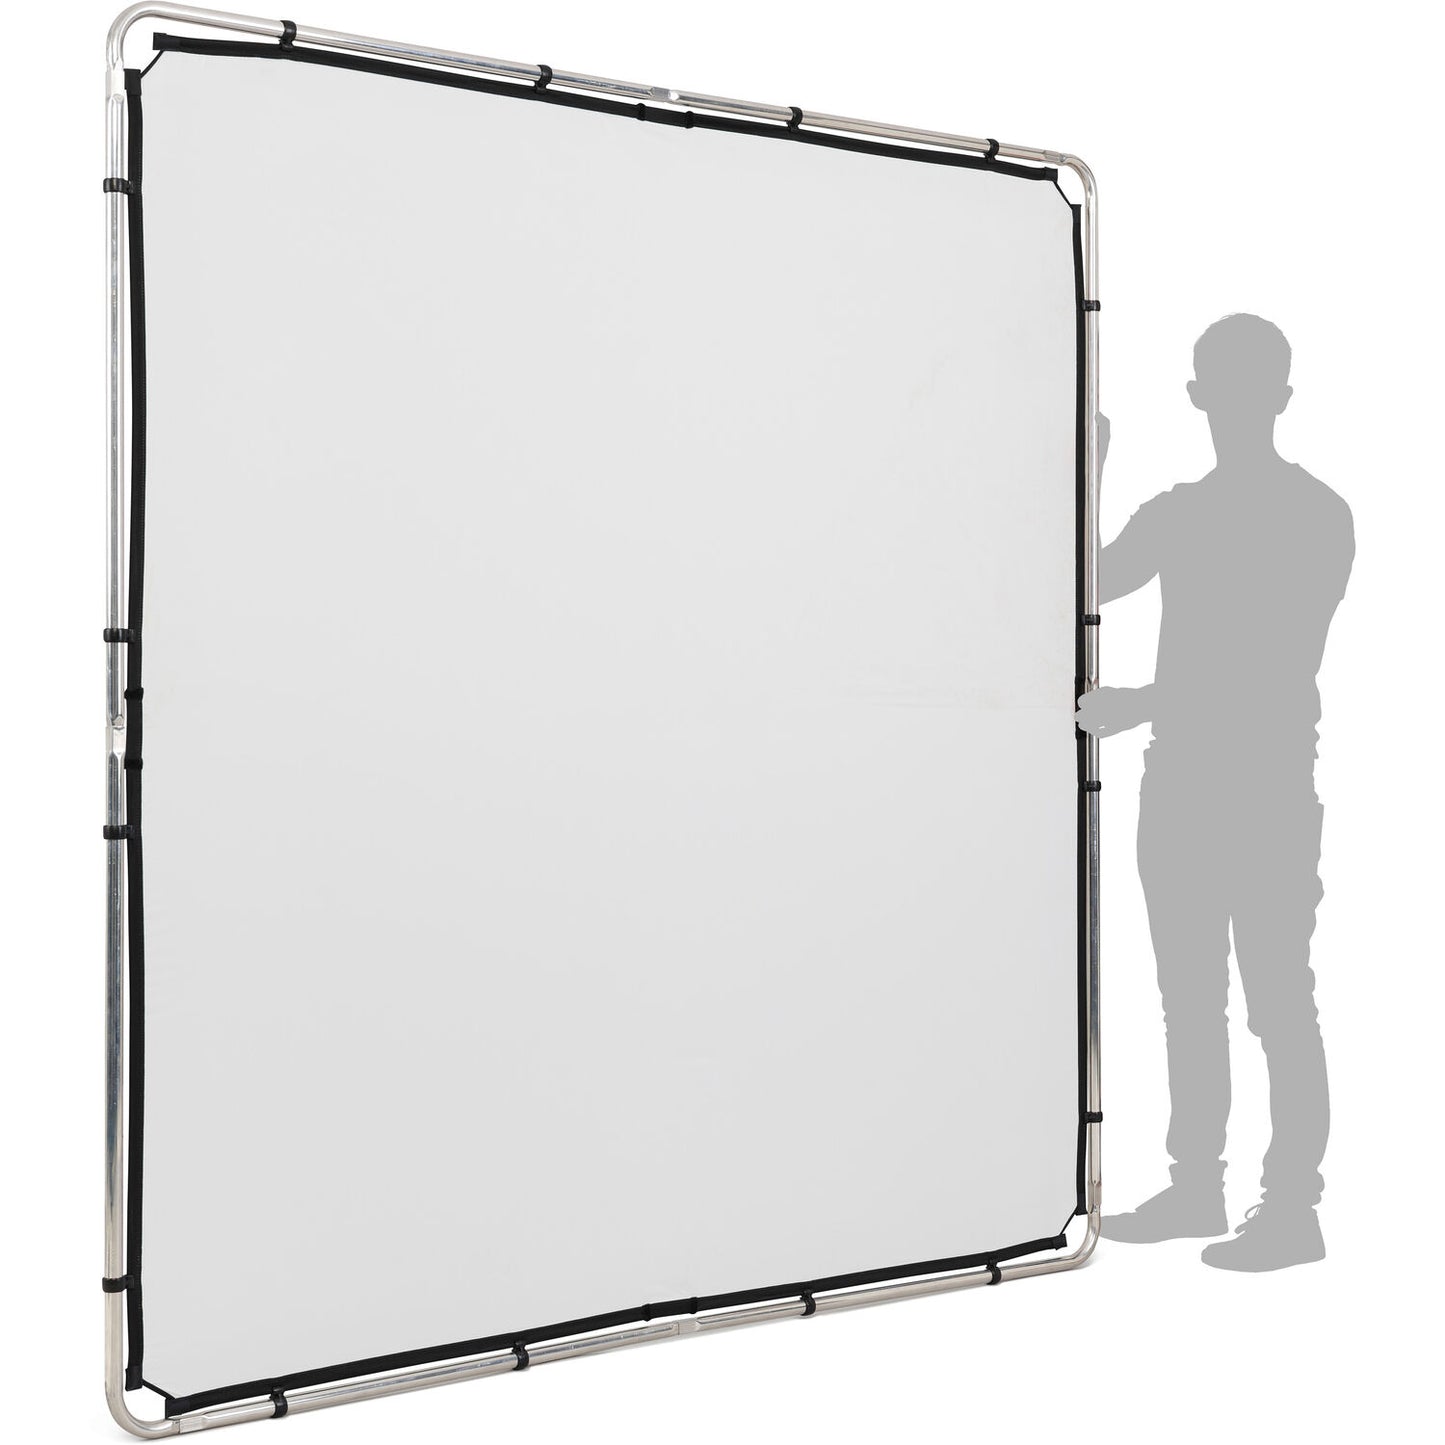 Manfrotto Large Pro Scrim All-in-One Kit (6.5 x 6.5')